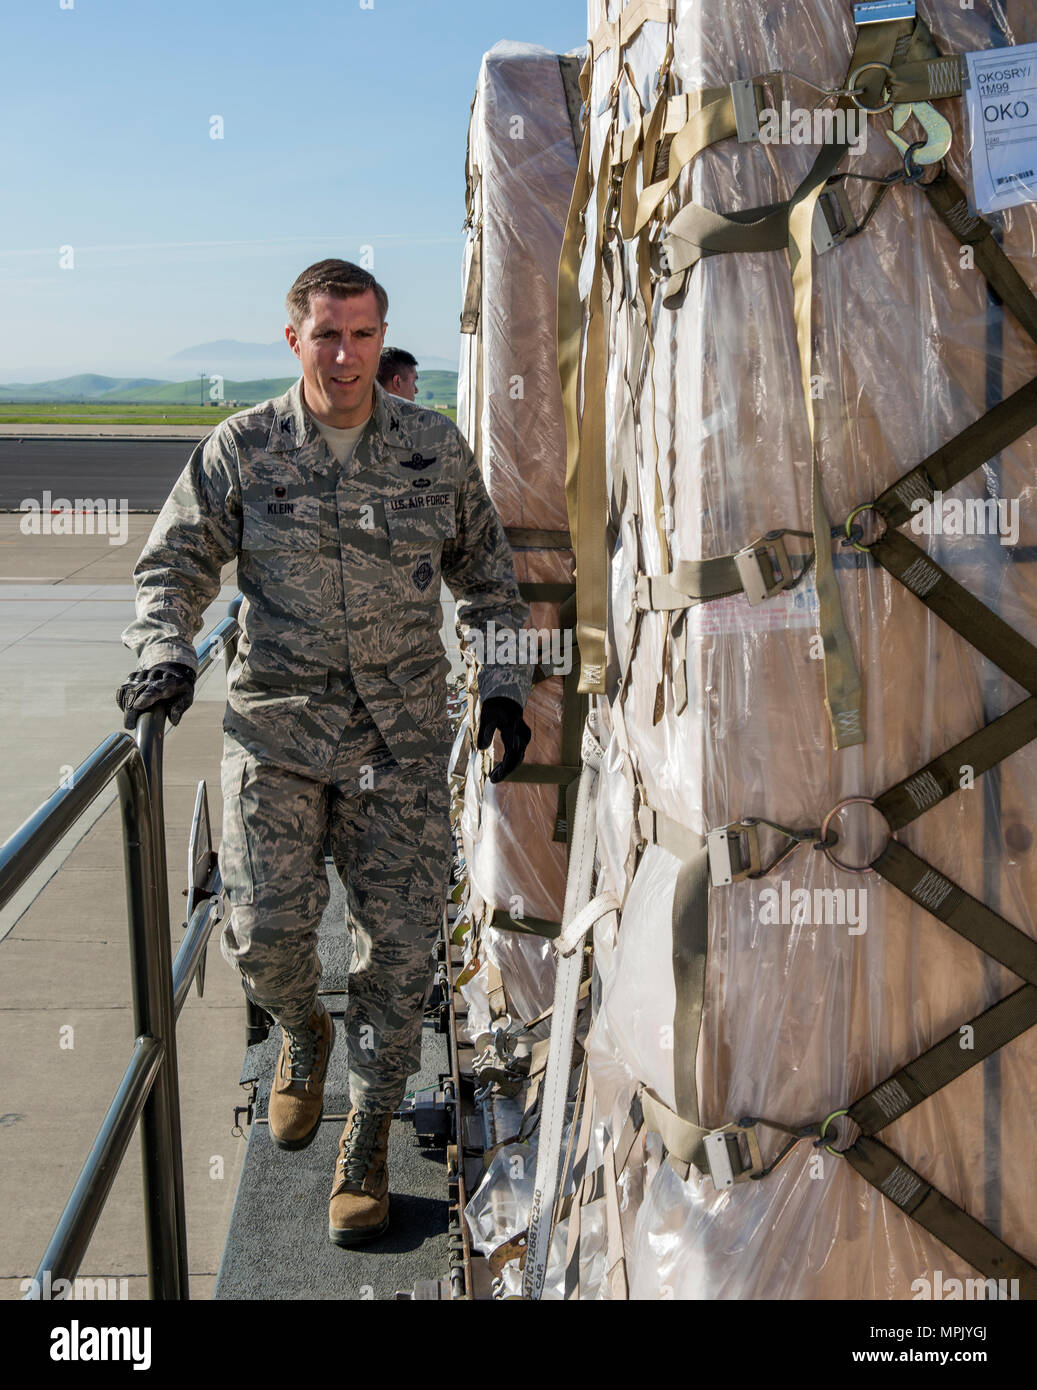 U.S. Air Force Col. John Klein, 60 Air Mobility Wing commander, prepares to move palletized cargo from a 60k Tunner loader onto a KC-10 Extender Aircraft during a Works with Airmen event at Travis Air Force Base, Calif., Mar. 17, 2017. The program is designed to allow wing leadership the opportunity to shadow junior enlisted Airmen and receive firsthand experience on how the Airman’s duties and responsibilities contribute to the wing’s overall mission. (U.S. Air Force photo  Heide Couch) Stock Photo